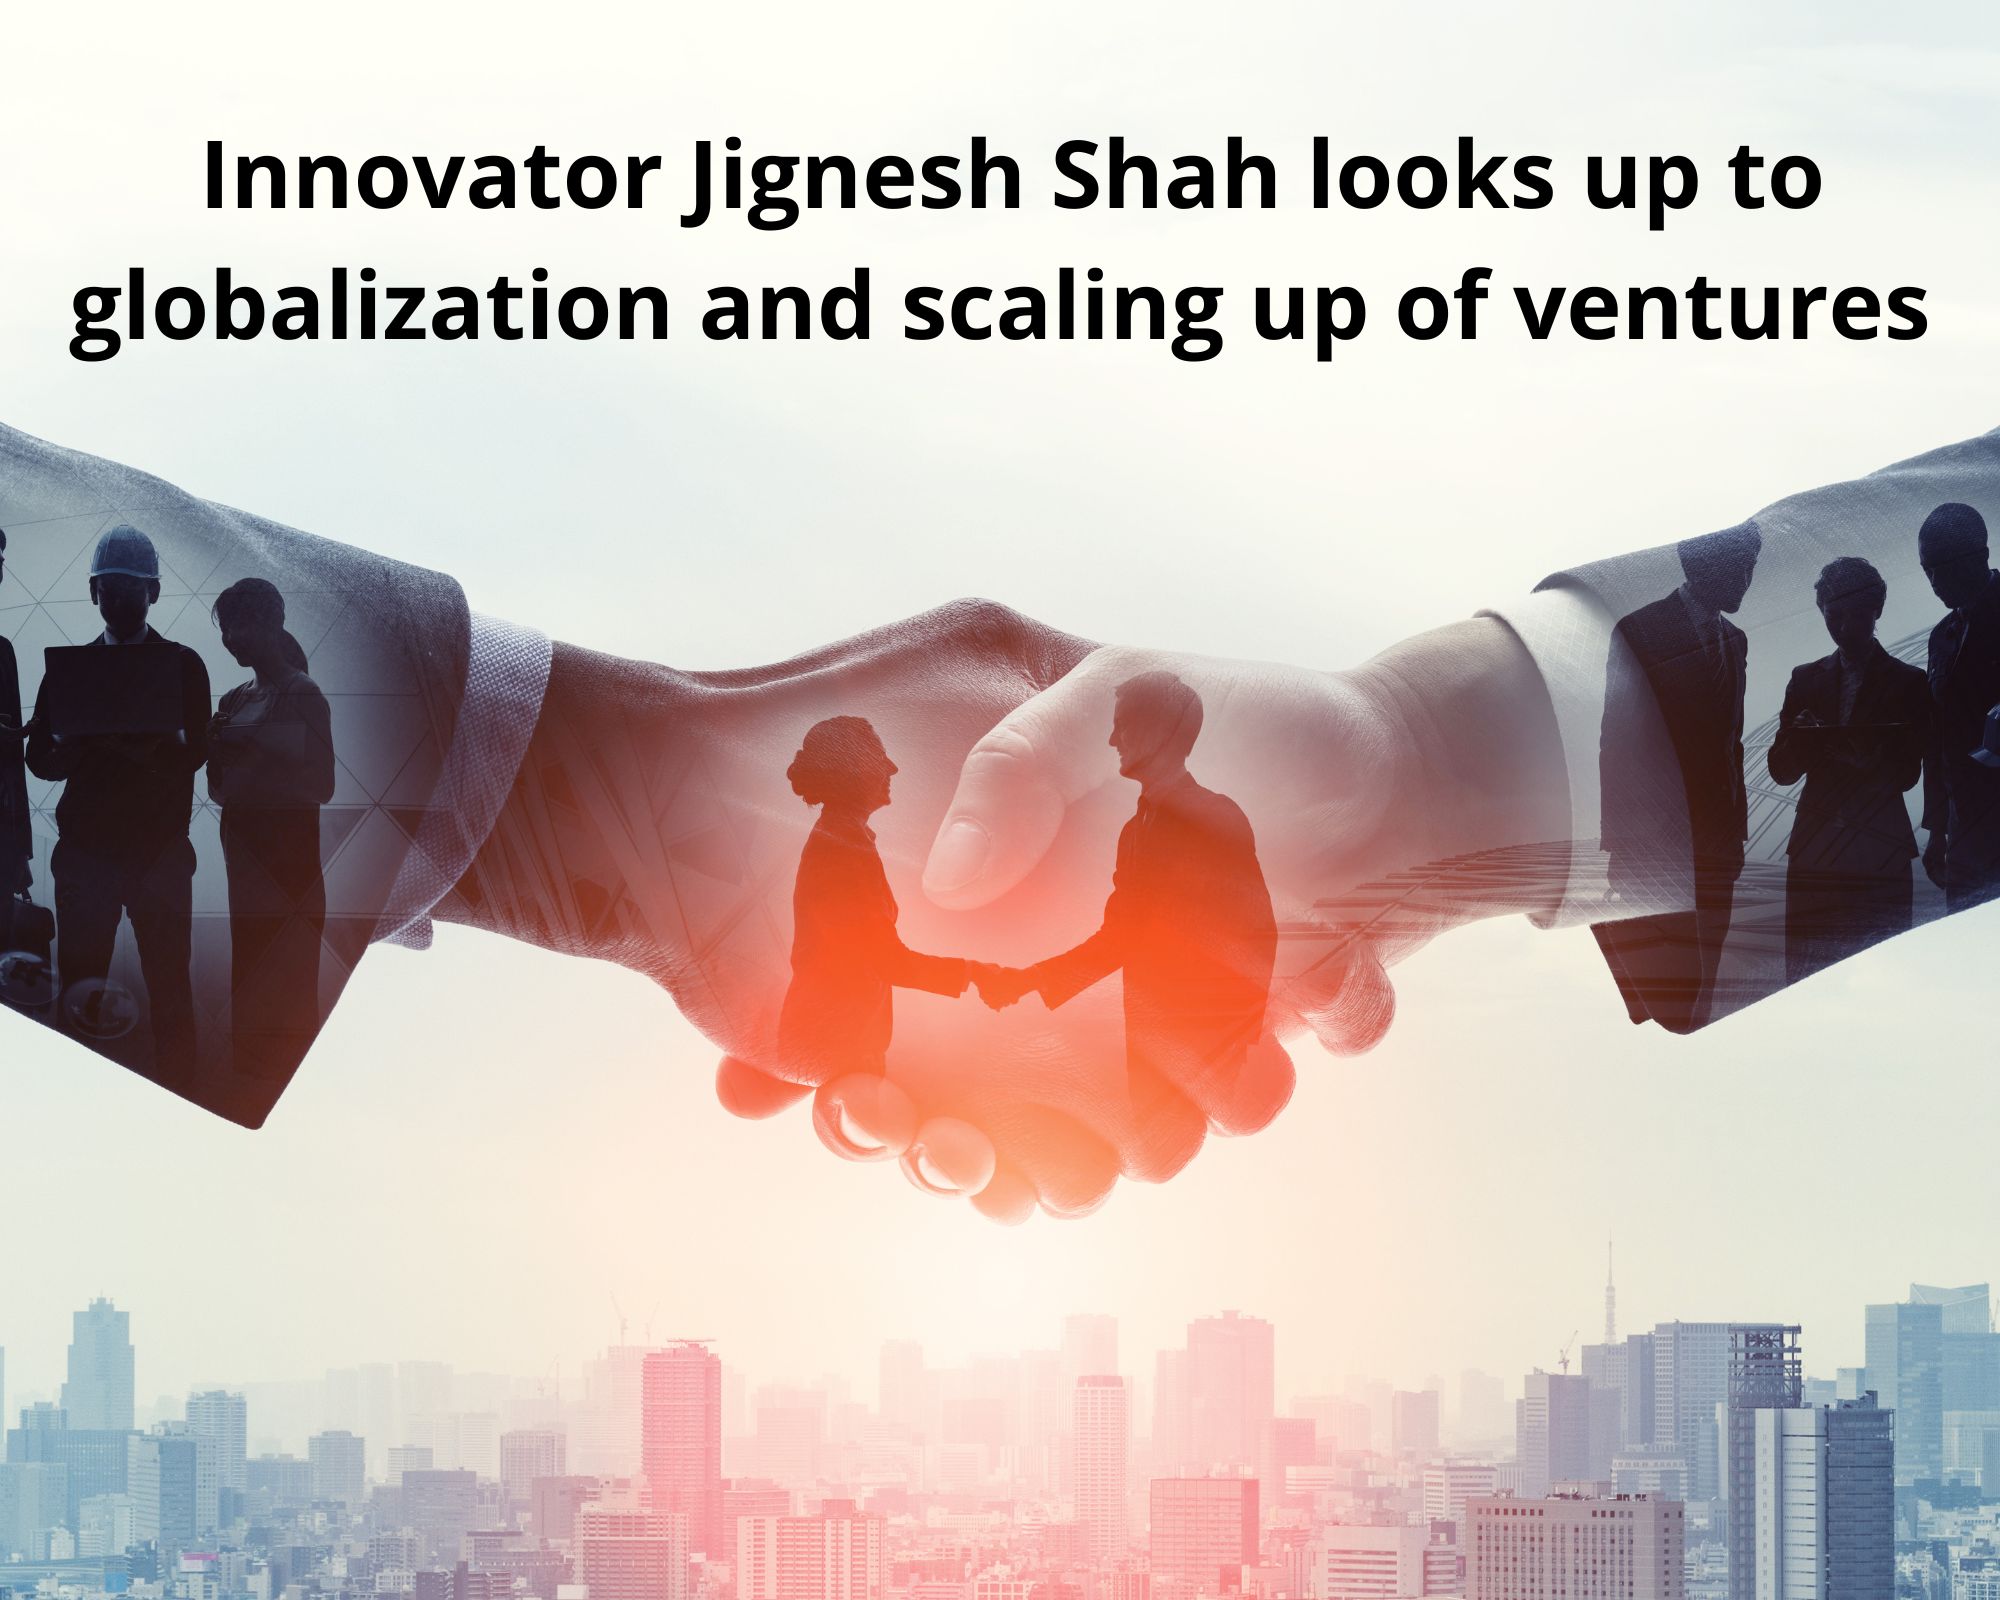 Jignesh Shah looks up to globalization & scaling up ventures